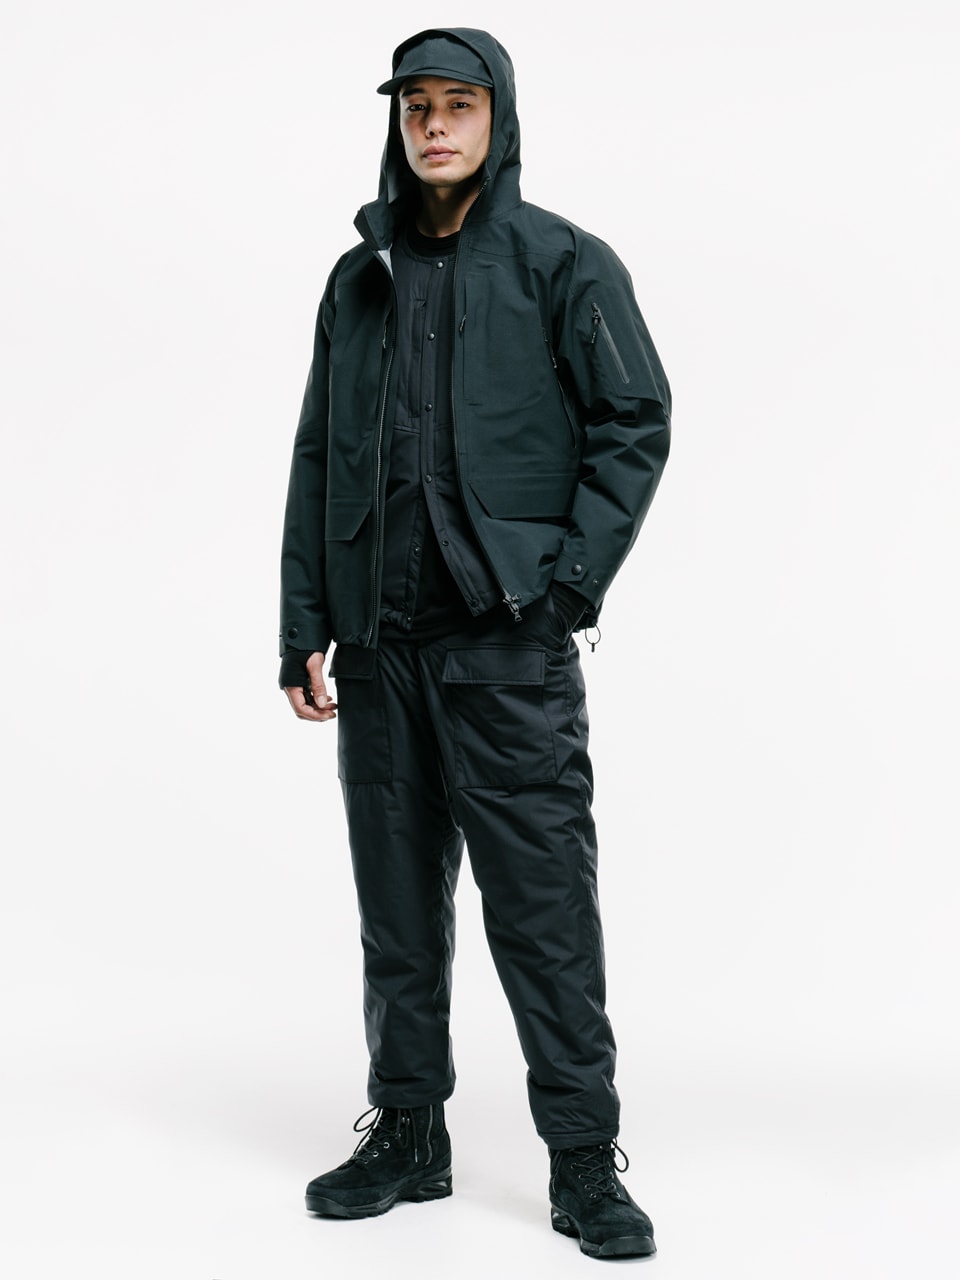 HAVEN Offers Sleek Technical Pieces for Fall/Winter 2022 Fashion